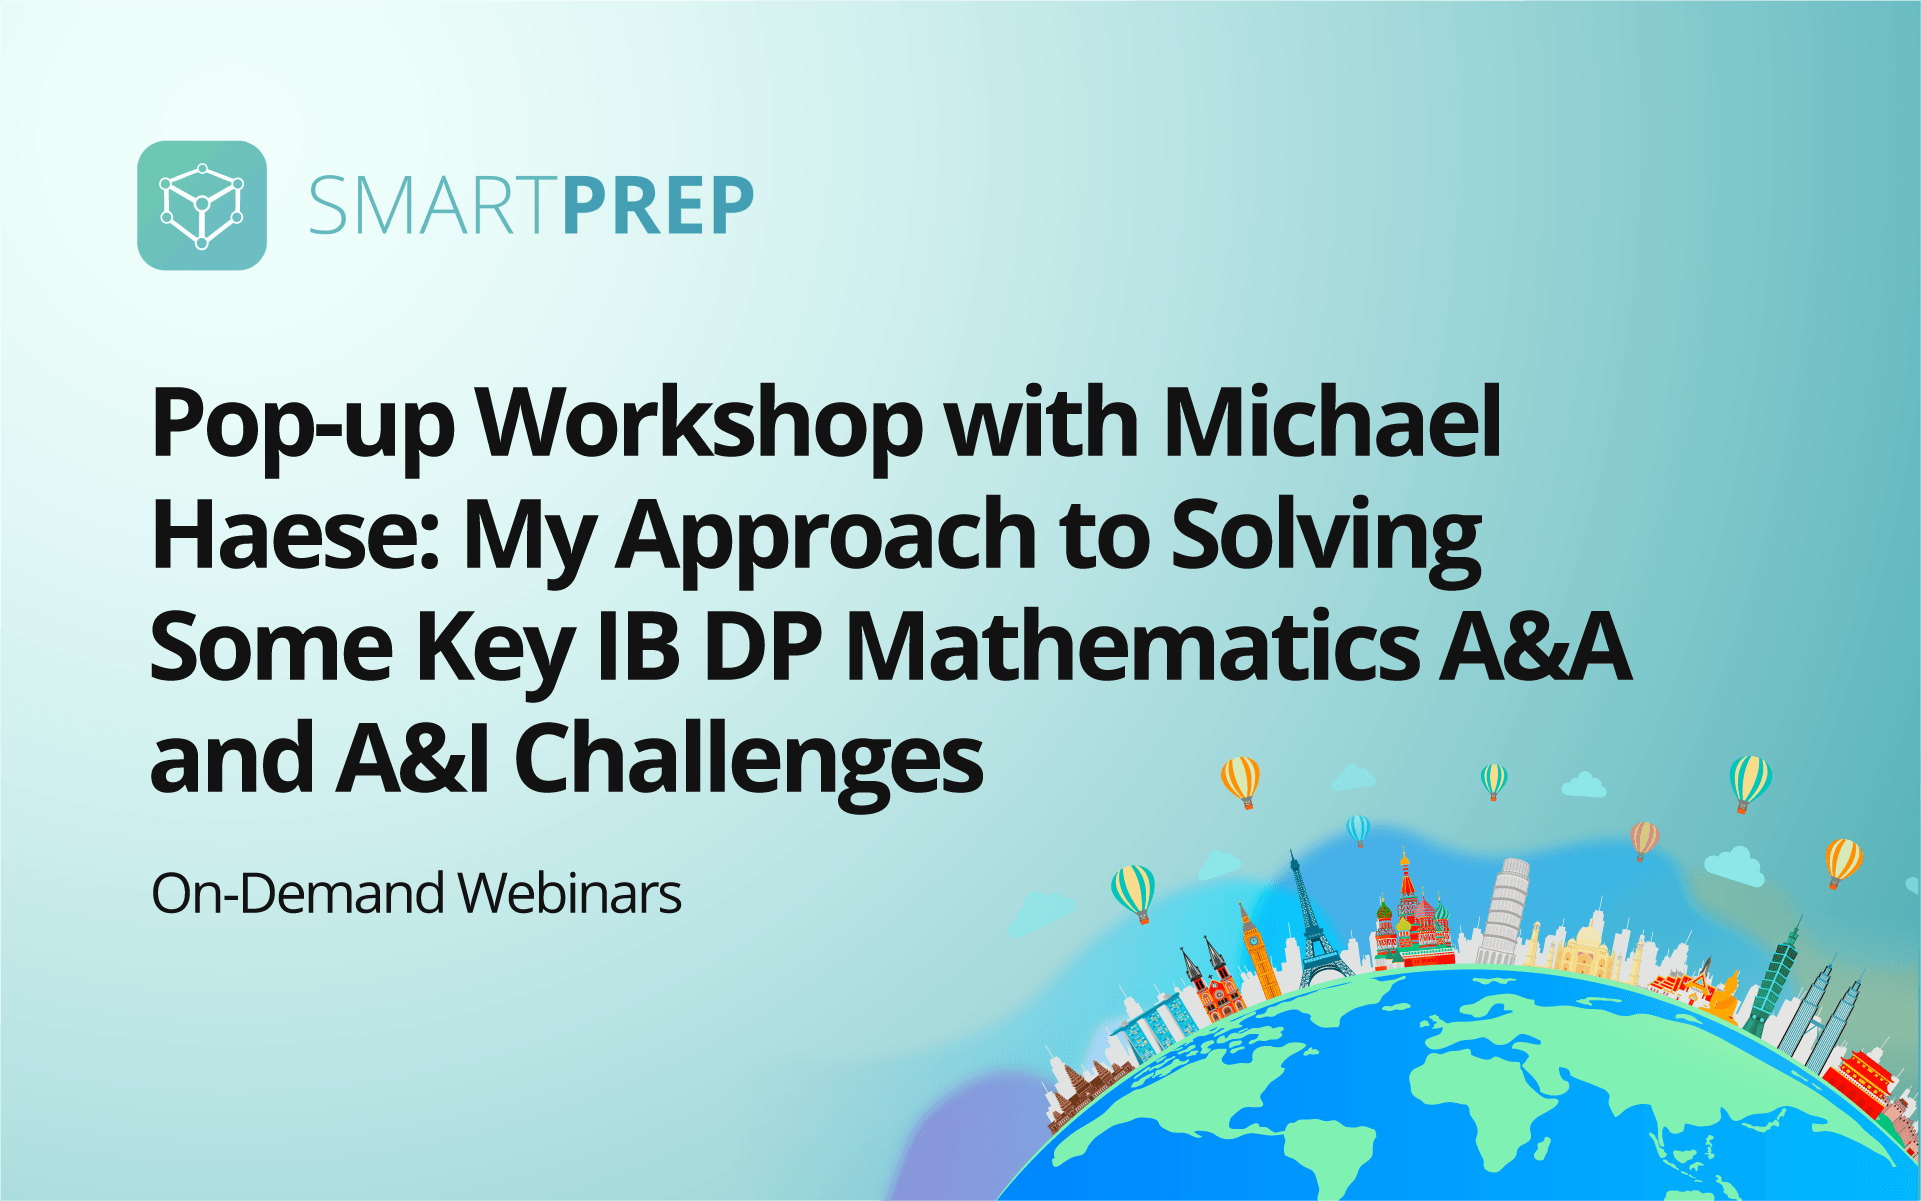 Pop-up workshop with Michael Haese: My approach to solving some key IB DP Mathematics A&A and A&I challenges